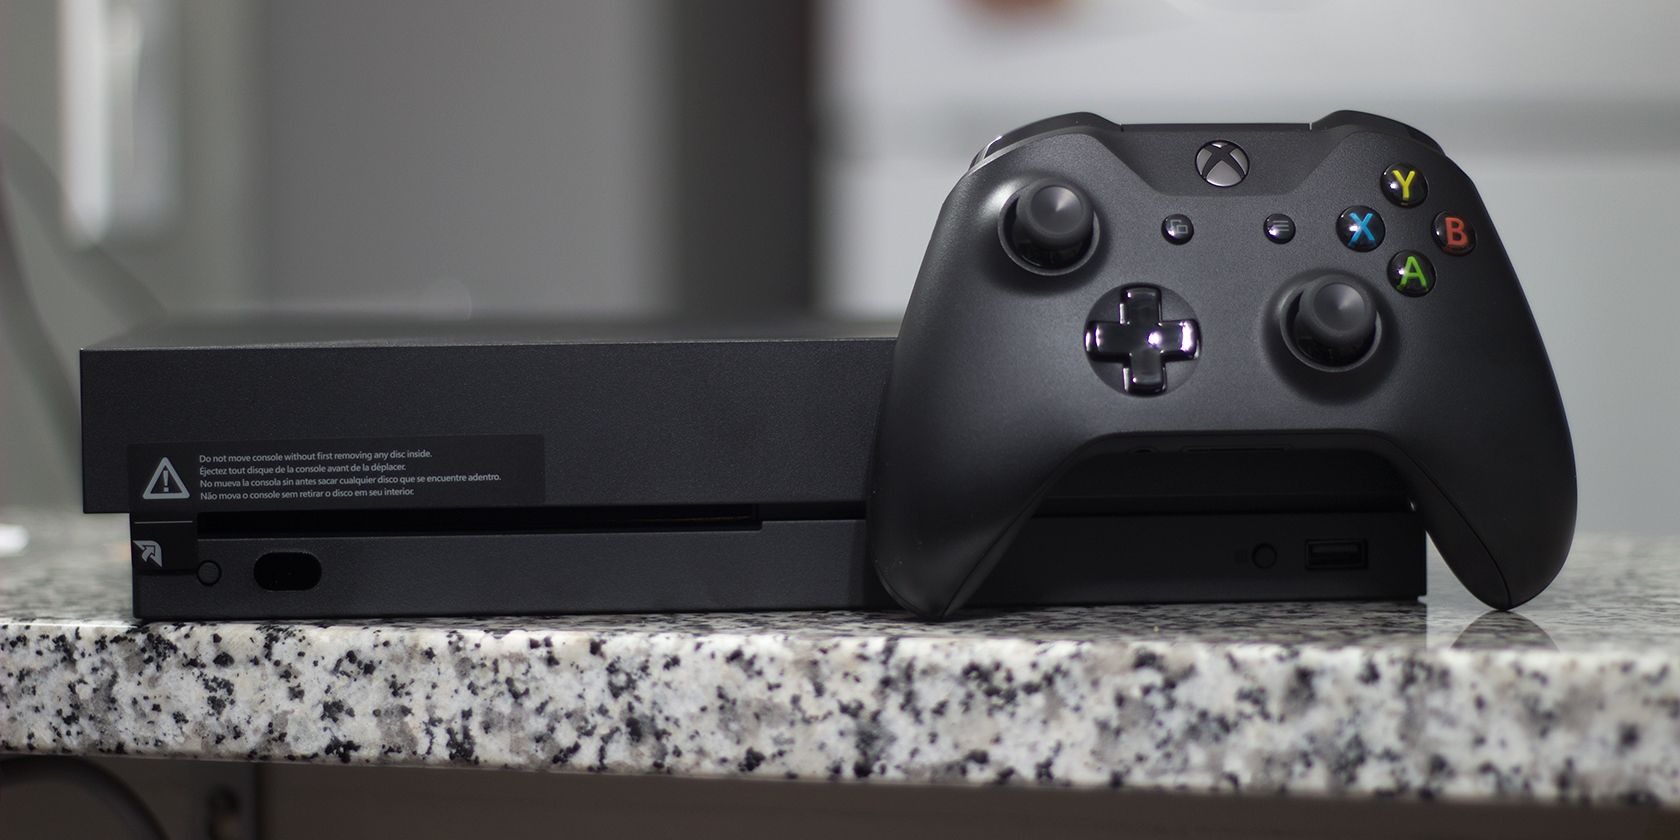 Xbox One X Review: It's the Next, Next Generation of Gaming